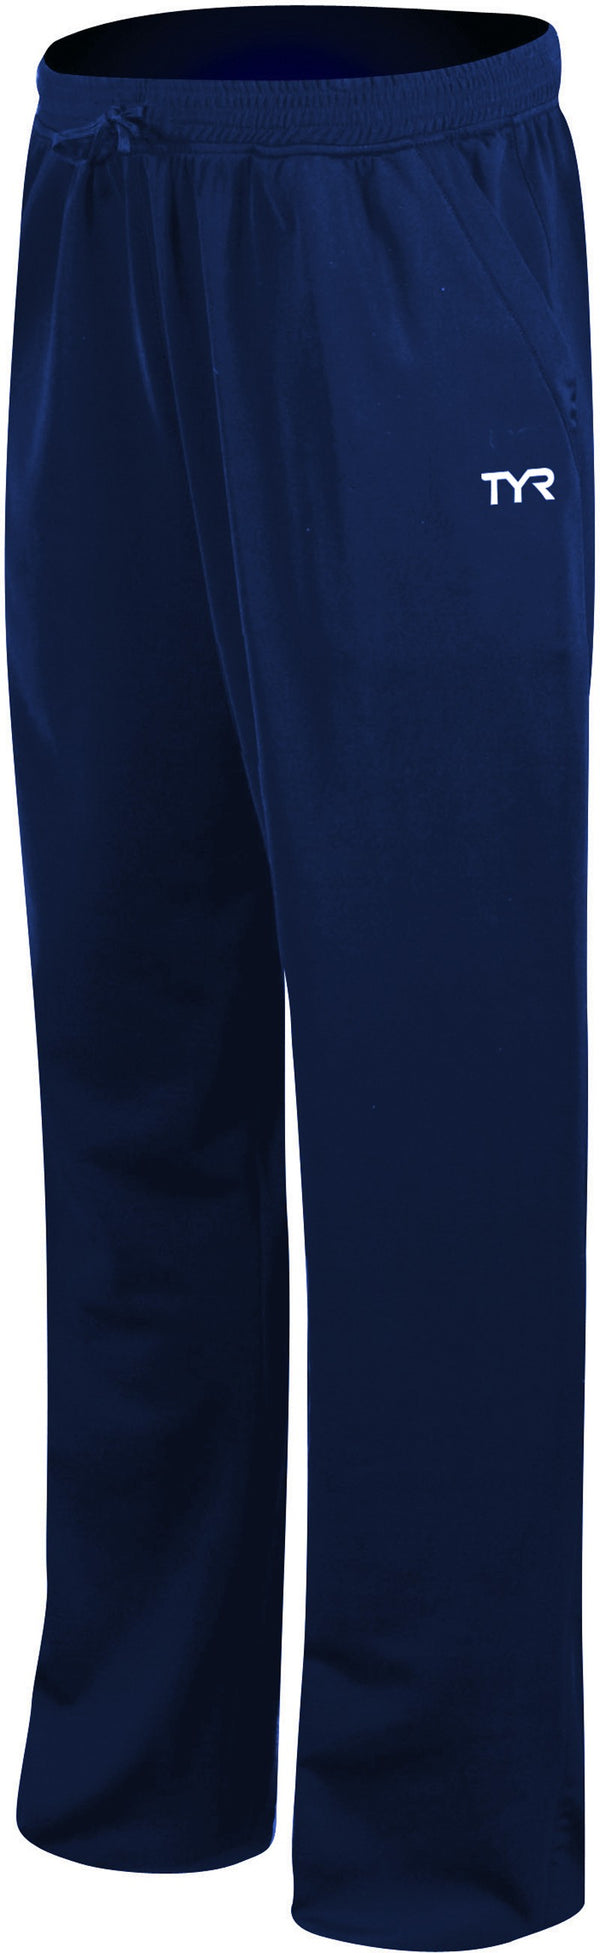 TYR Men's Alliance Victory Warm Up Pant